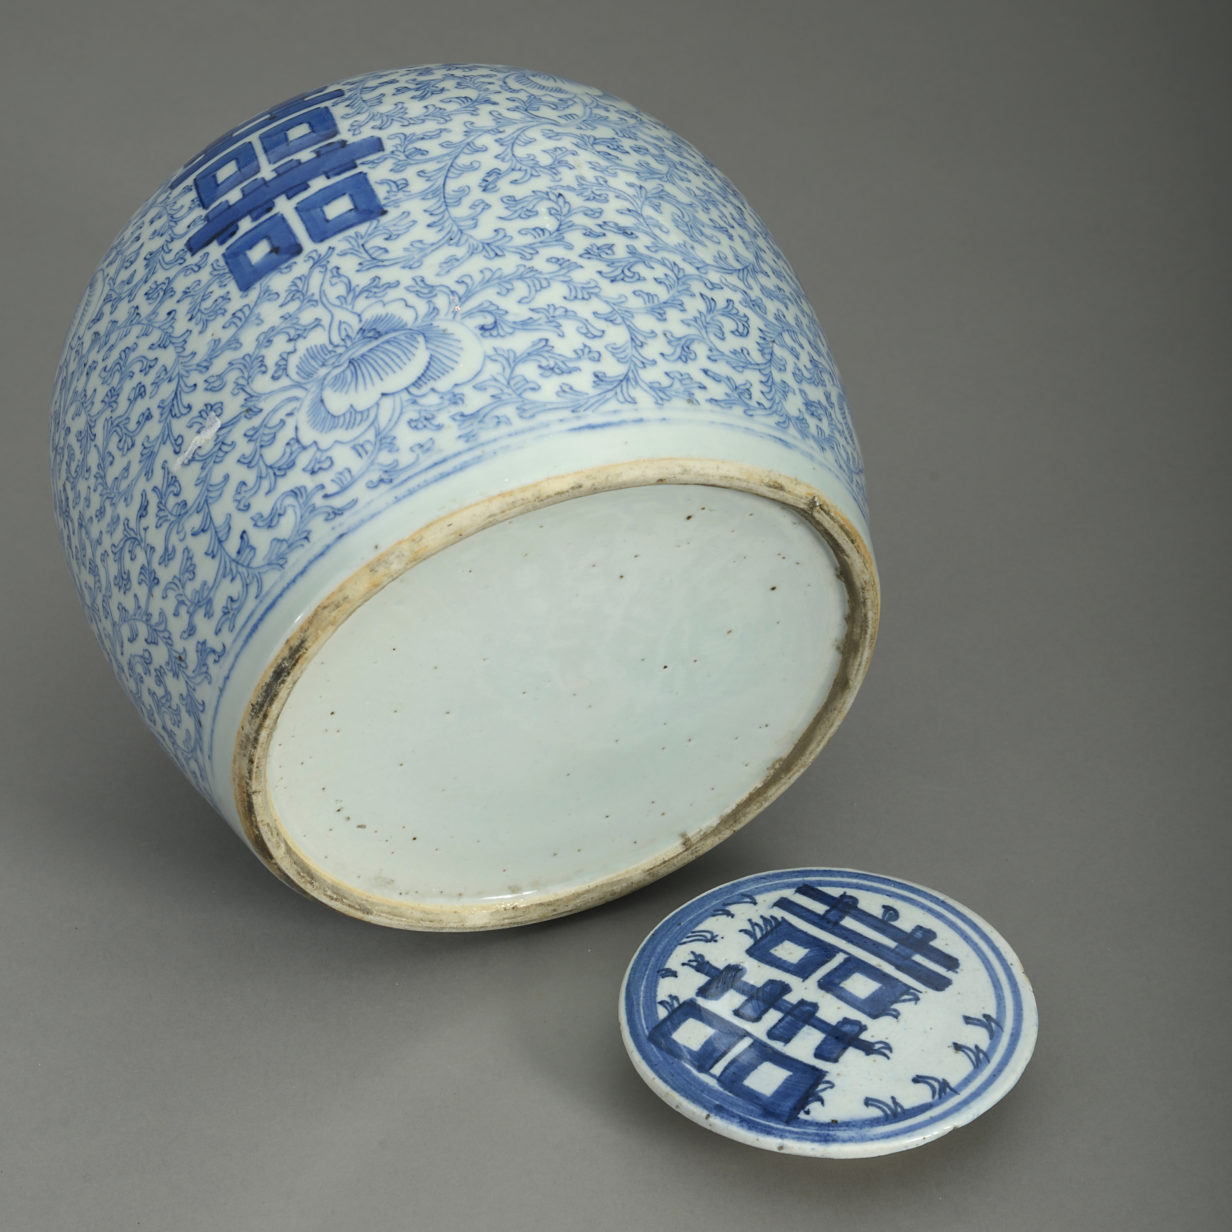 Early 19th century blue and white porcelain jar and cover